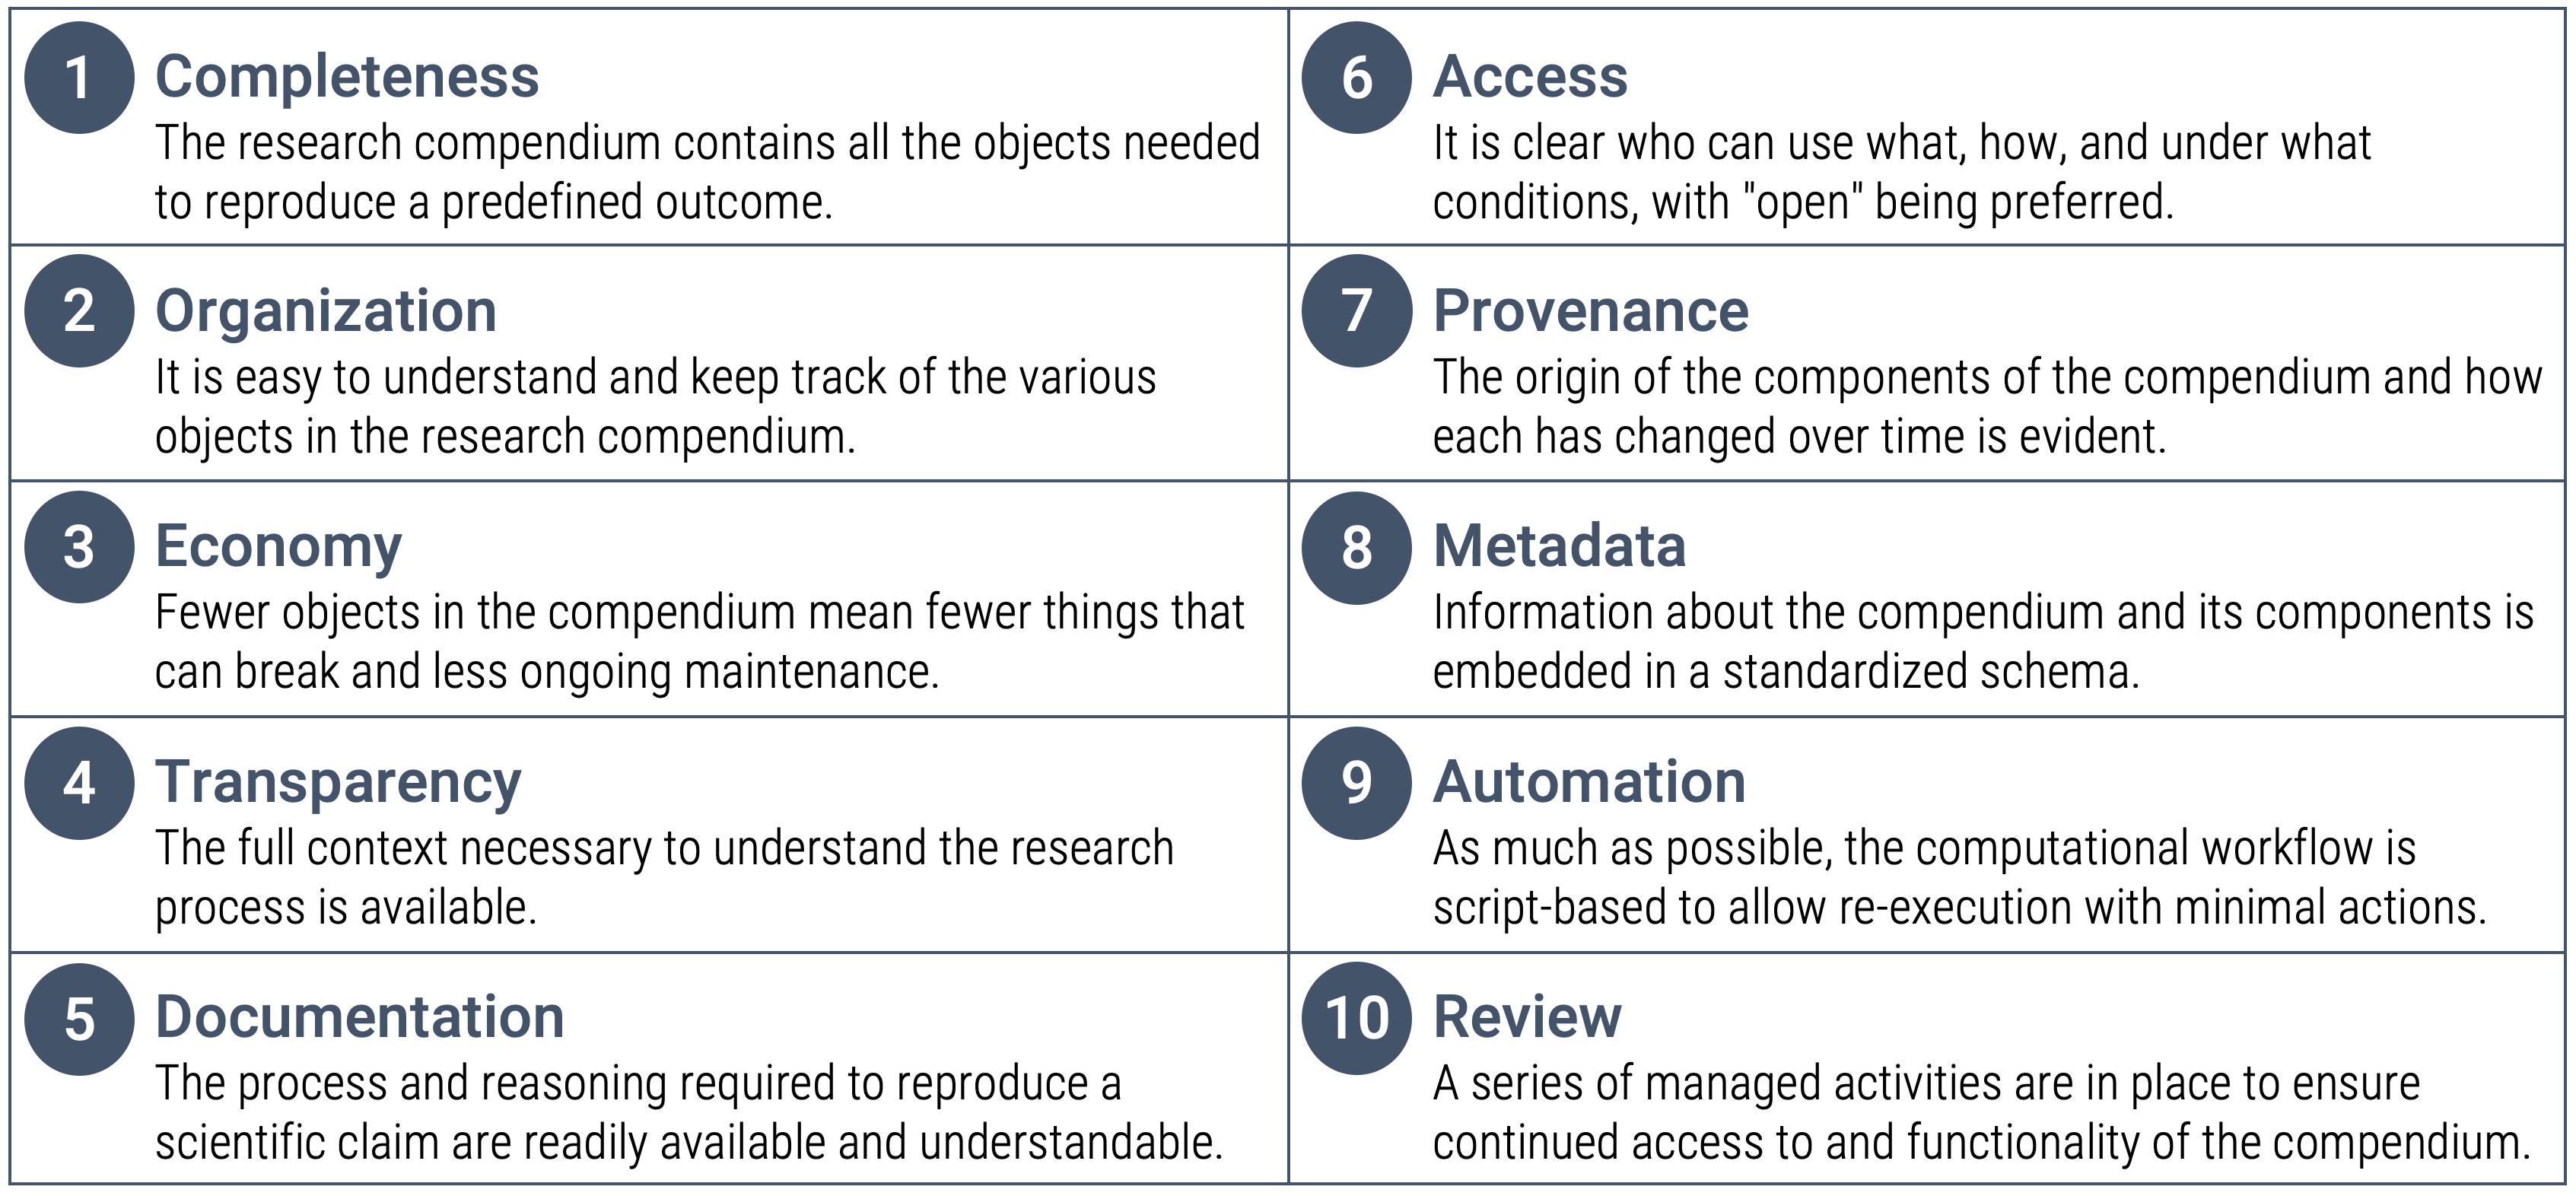 10 Things for Curating Reproducible and FAIR Research